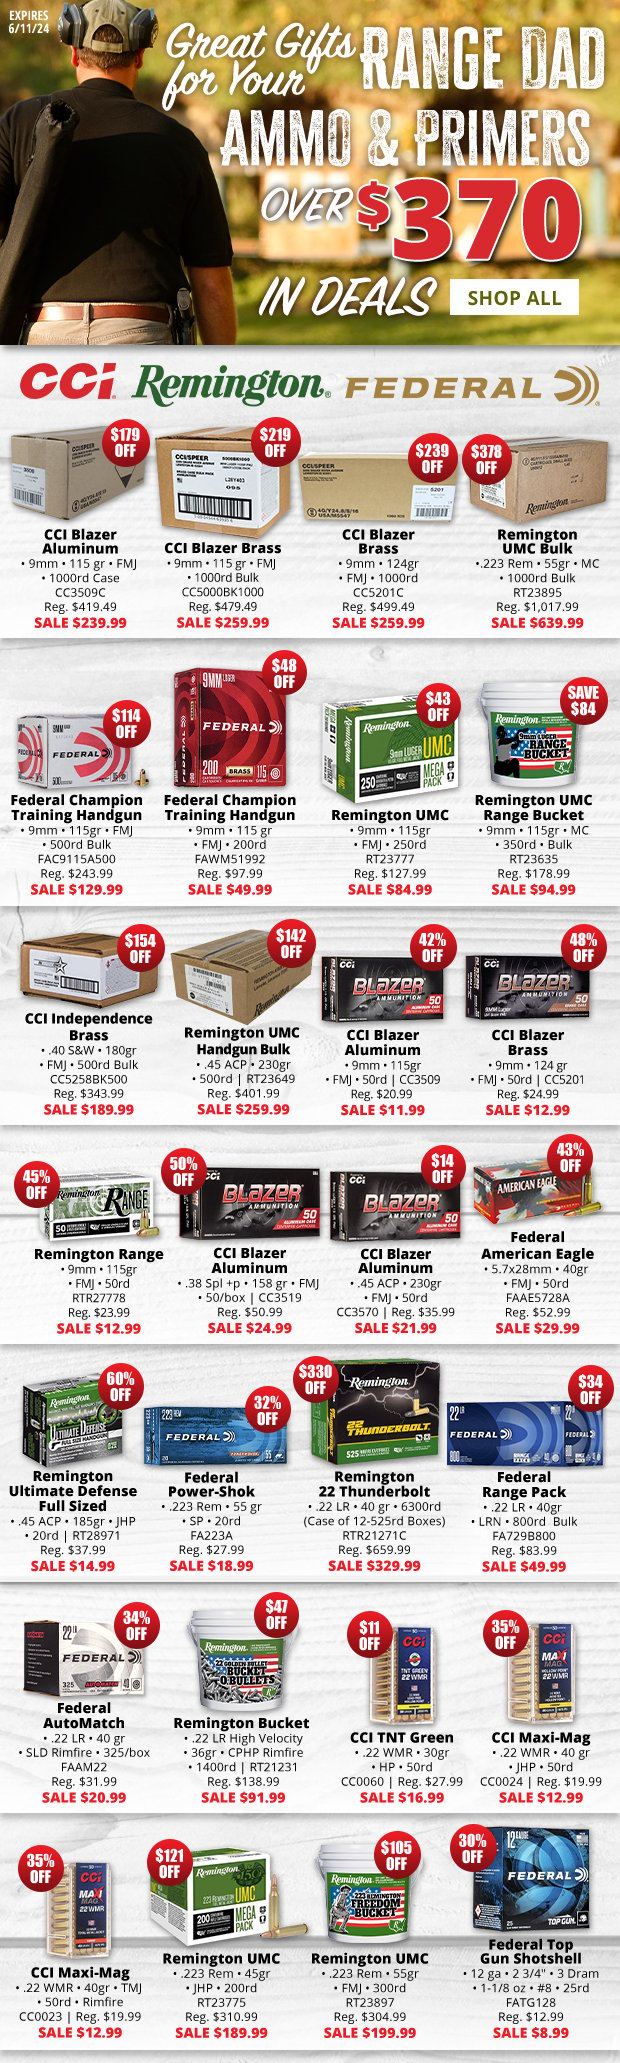 Over $370 in Deals on Ammo & Primers. Great Gifts for Dad!